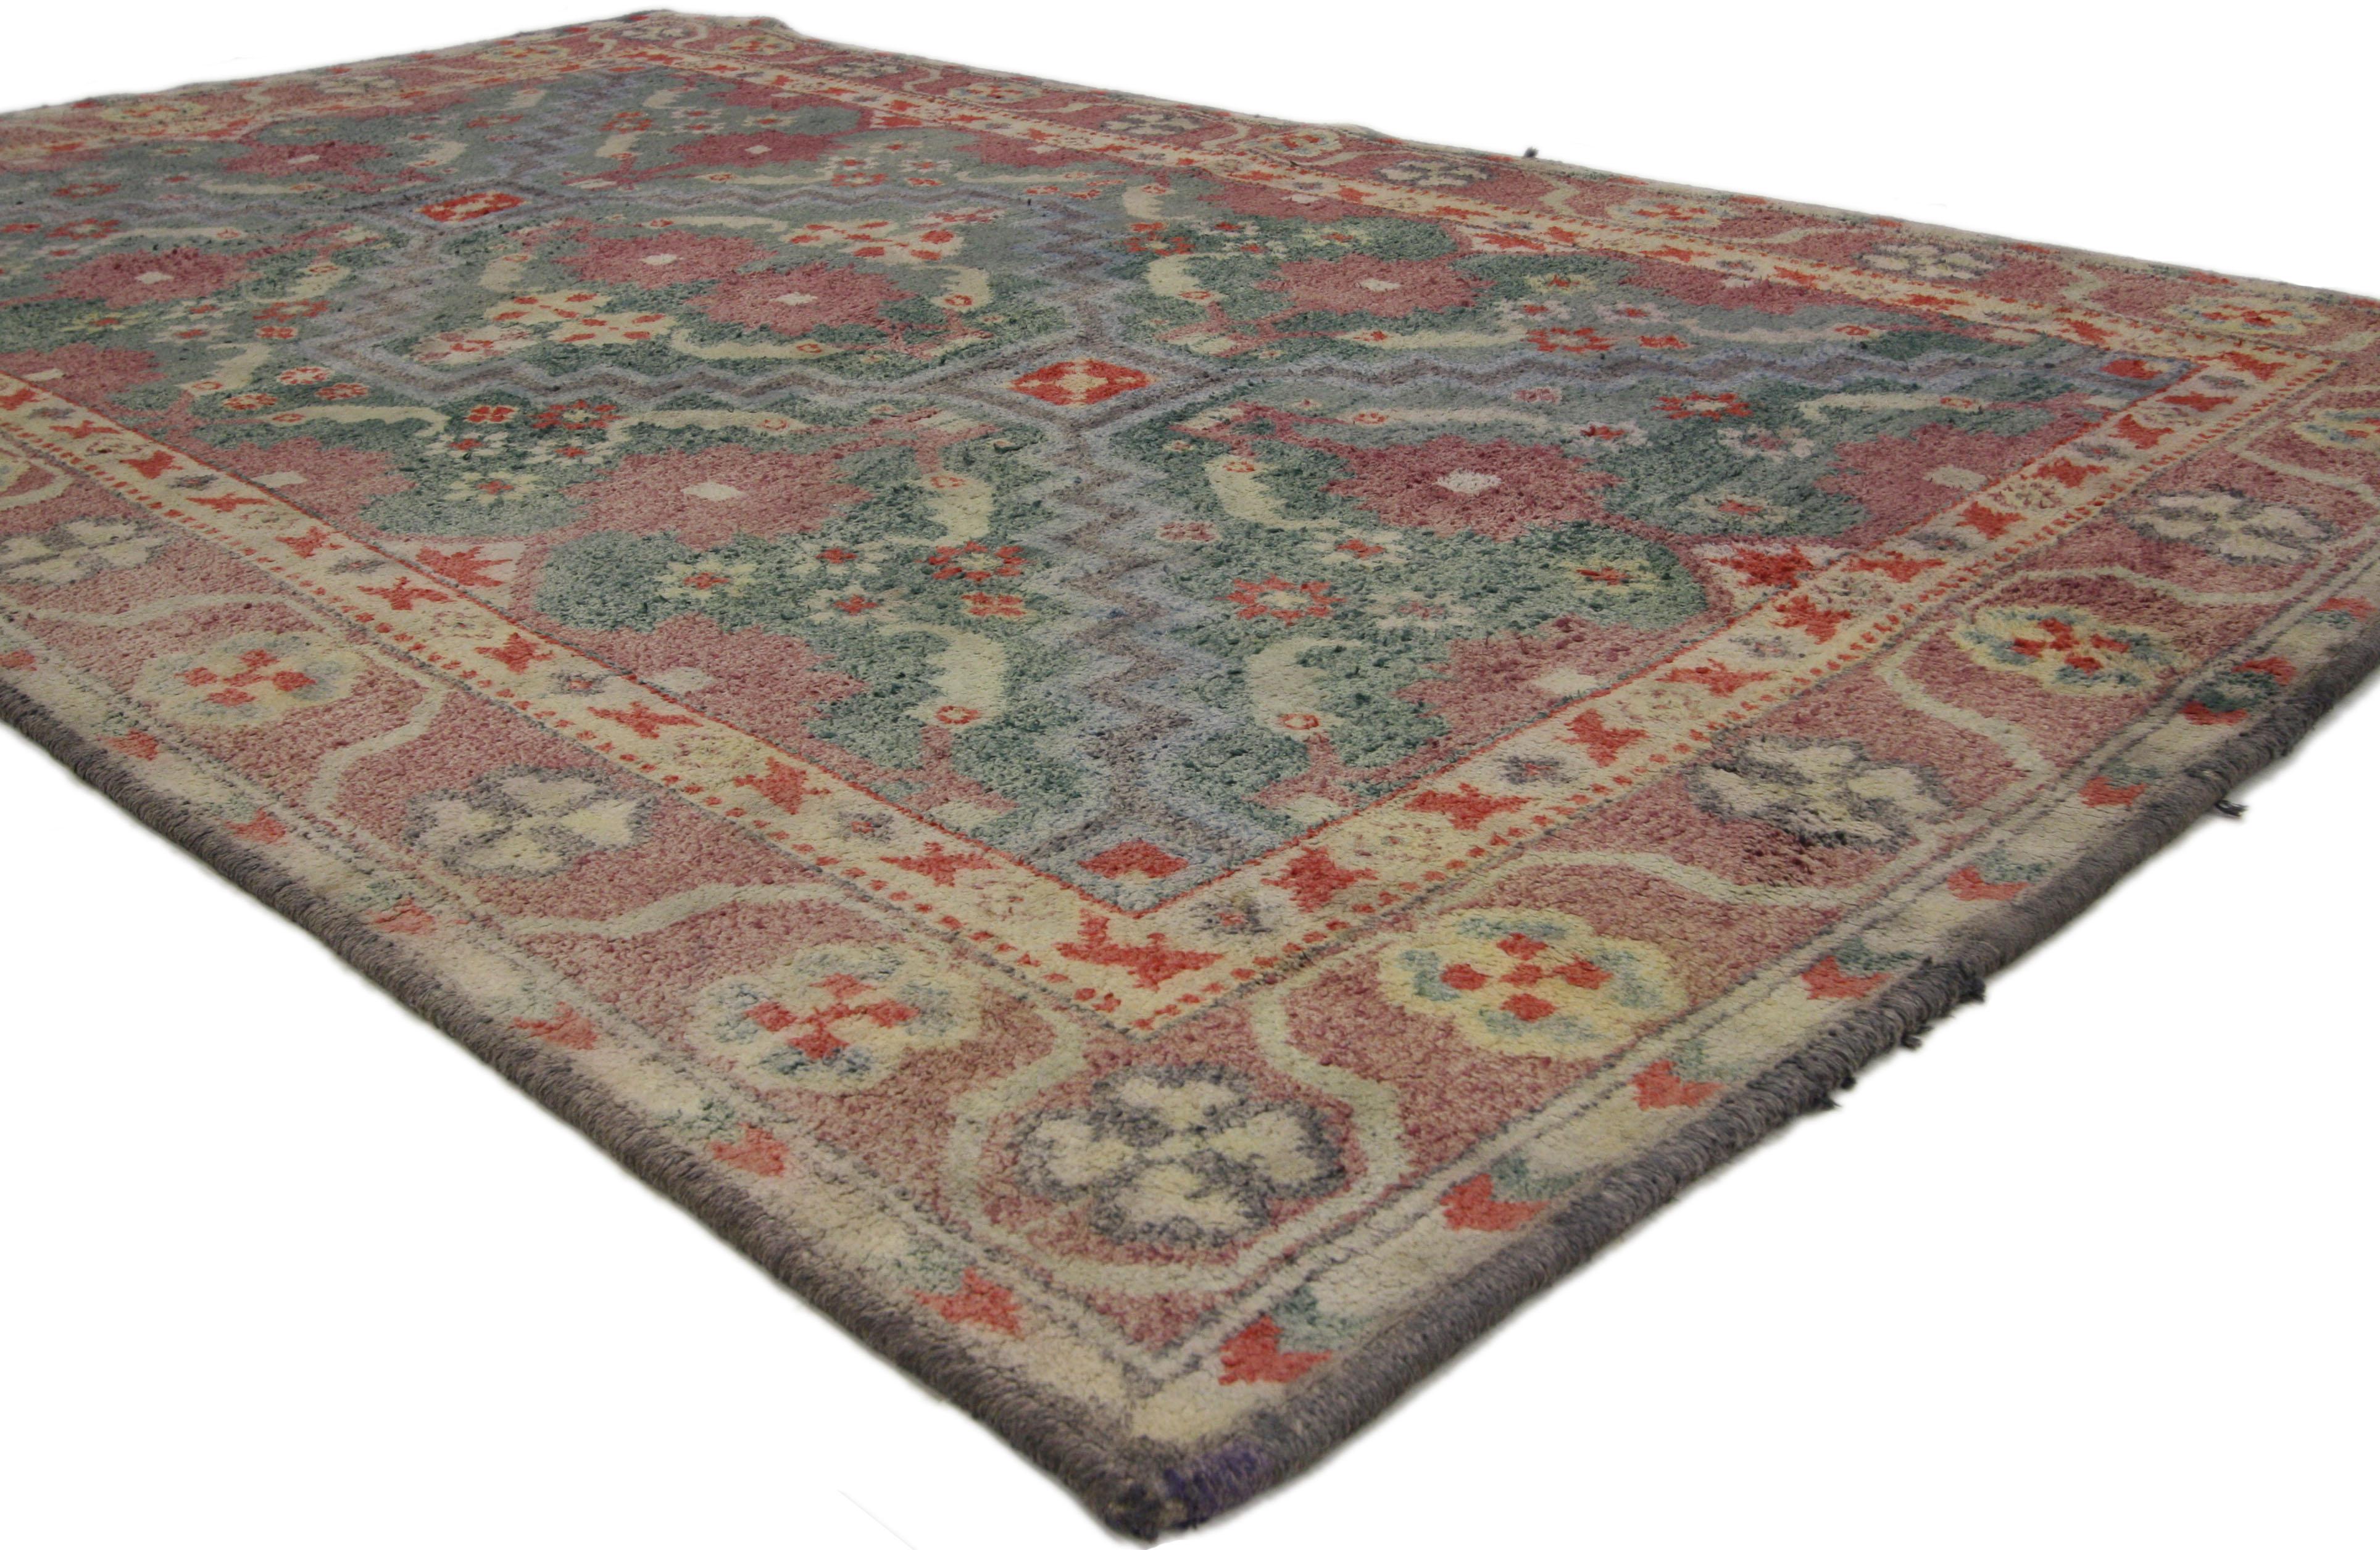 73302 Antique Indian Agra Accent Rug with English Country Cottage Style 04'06 x 07'04. This hand-knotted cotton antique Indian Agra rug features an all-over botanical pattern composed of stylized florals, rosettes, serrated leaves, and blooming